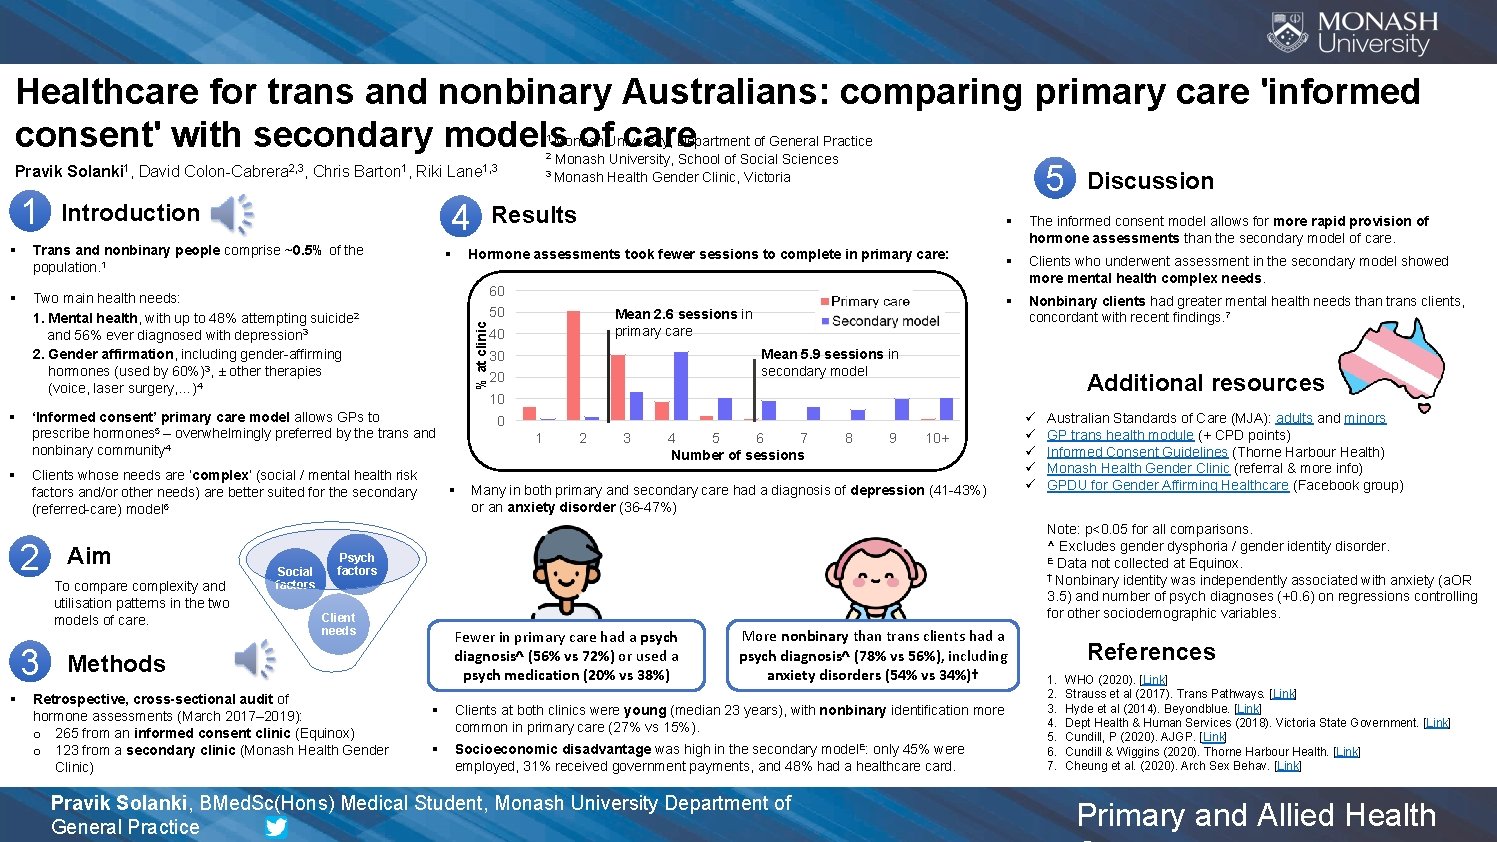 Healthcare for trans and nonbinary Australians: comparing primary care 'informed consent' with secondary models